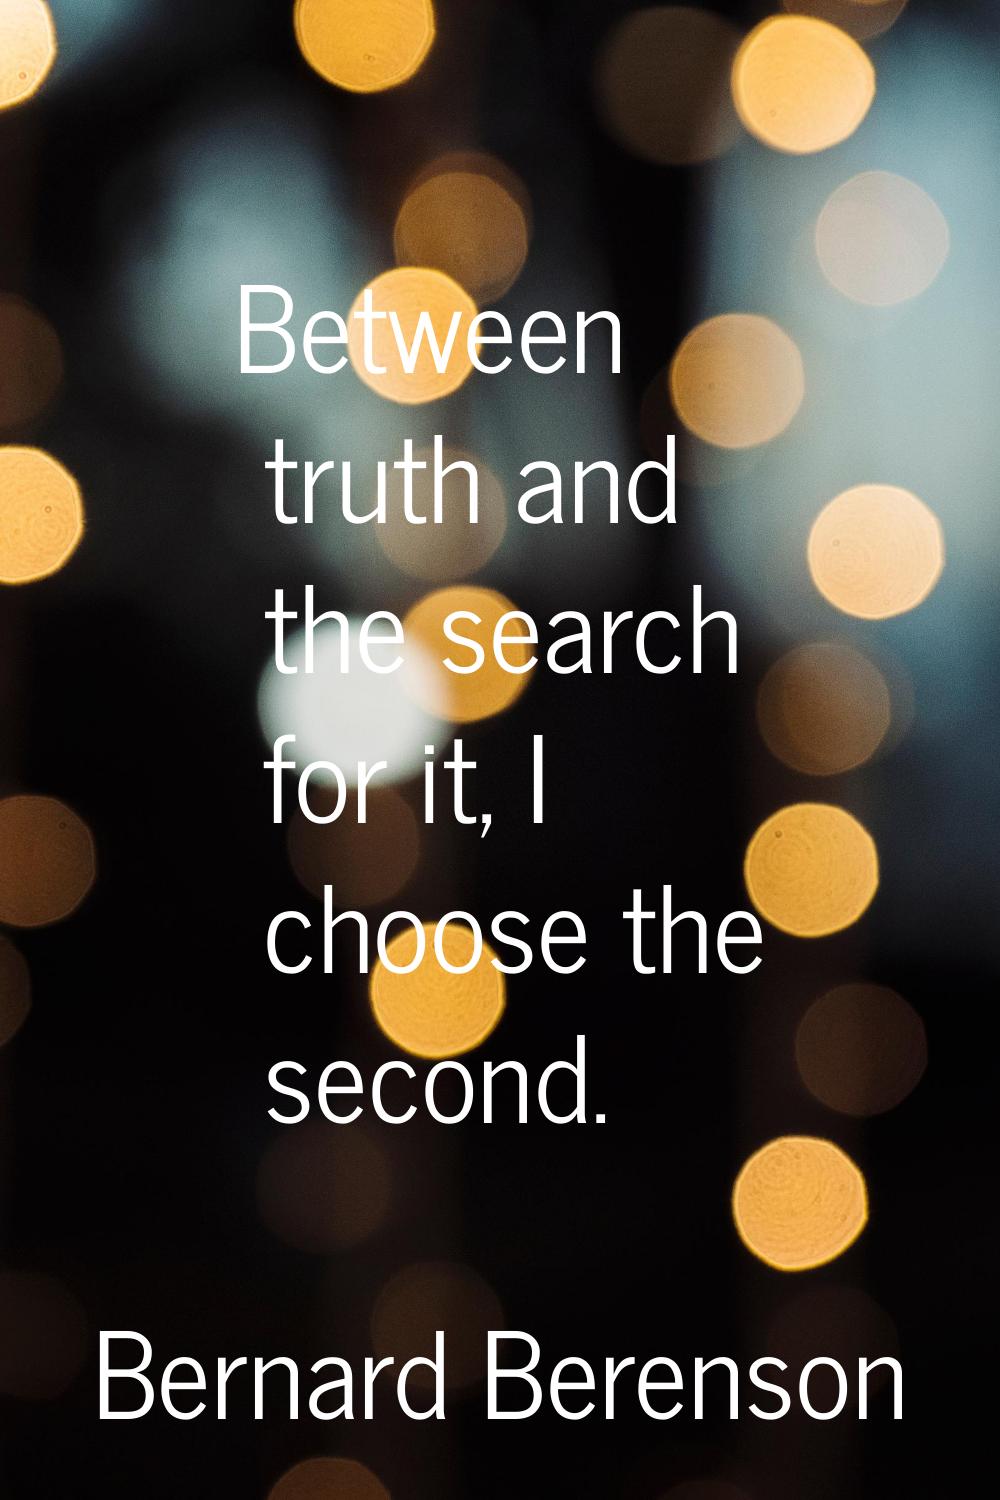 Between truth and the search for it, I choose the second.